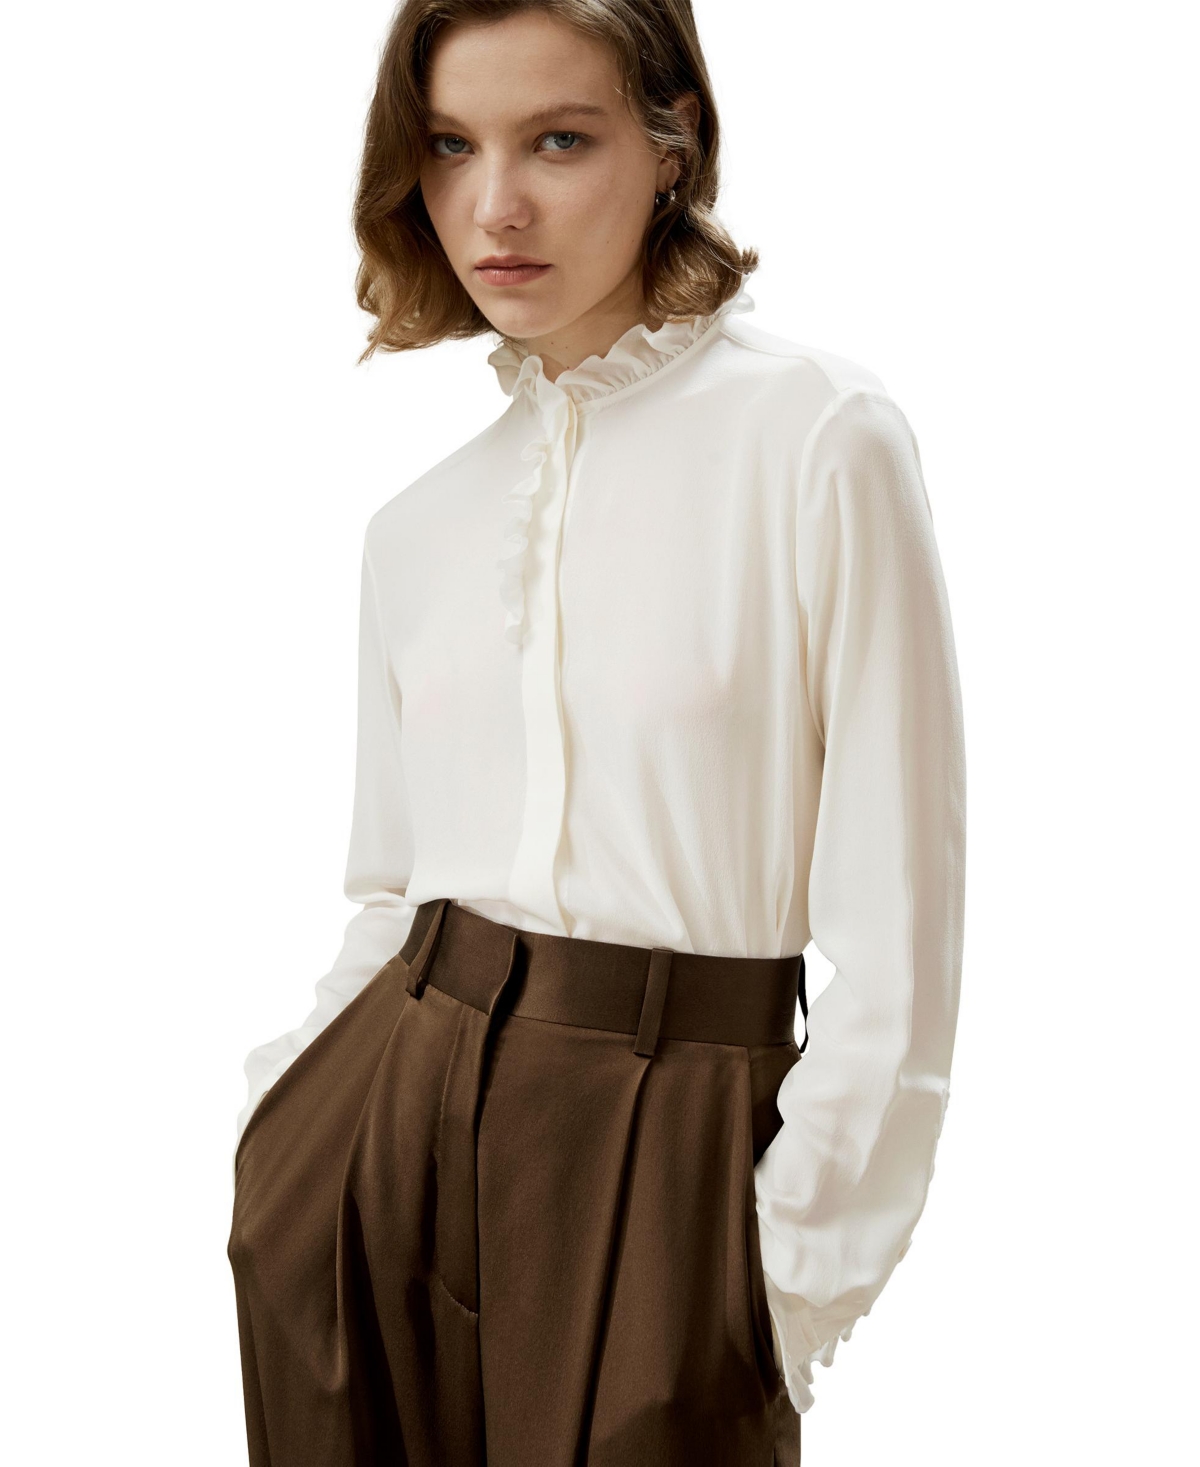 Women's Crepe de Chine Silk Blouse with Ruffle Edge for Women - Natural white